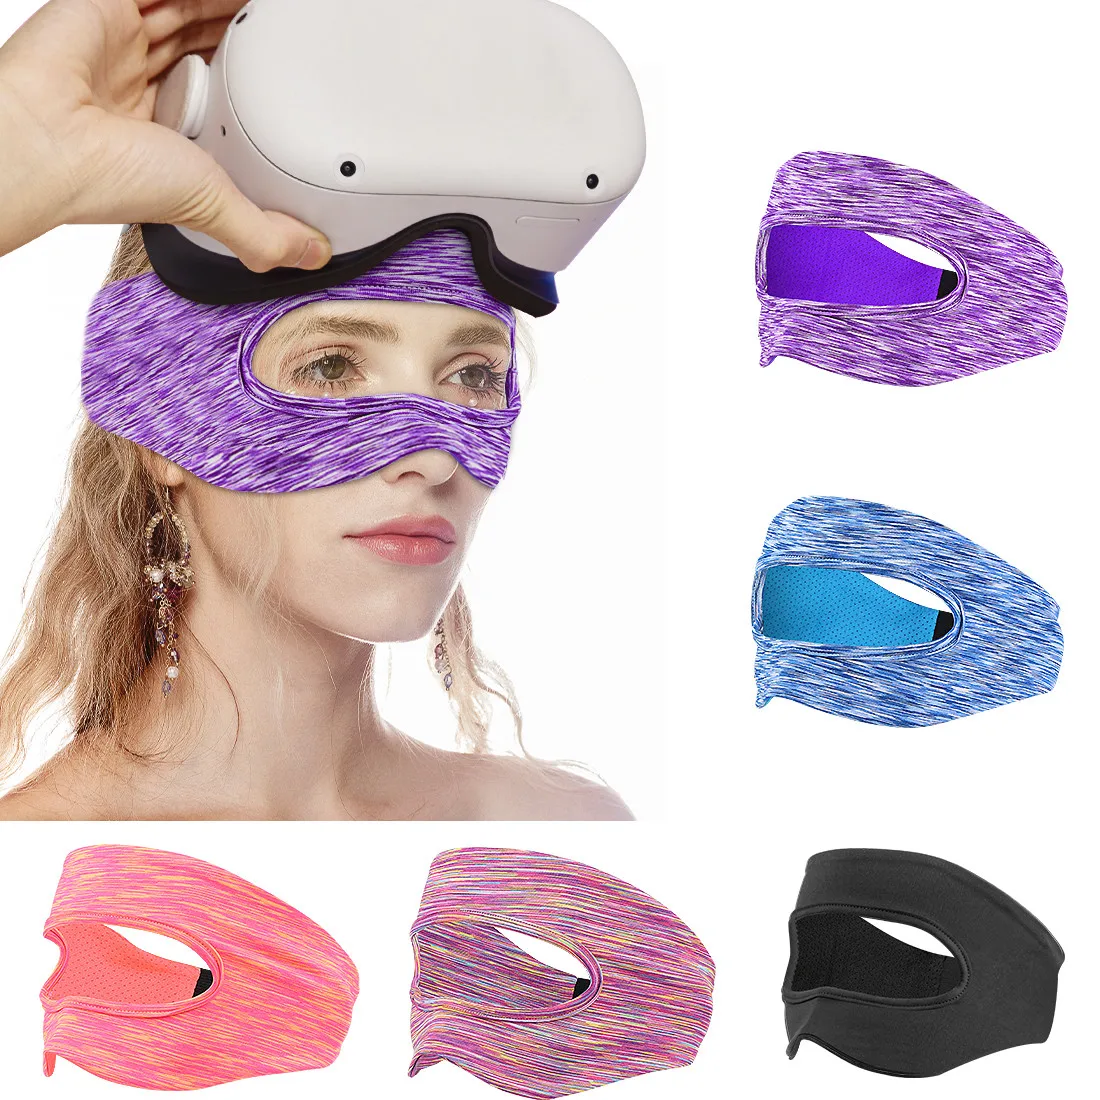 

Adjustable Sizes Eye Mask Cover Breathable Sweat Band Padding with Virtual Reality Headsets For Oculus Quest 2 1 VR Accessories